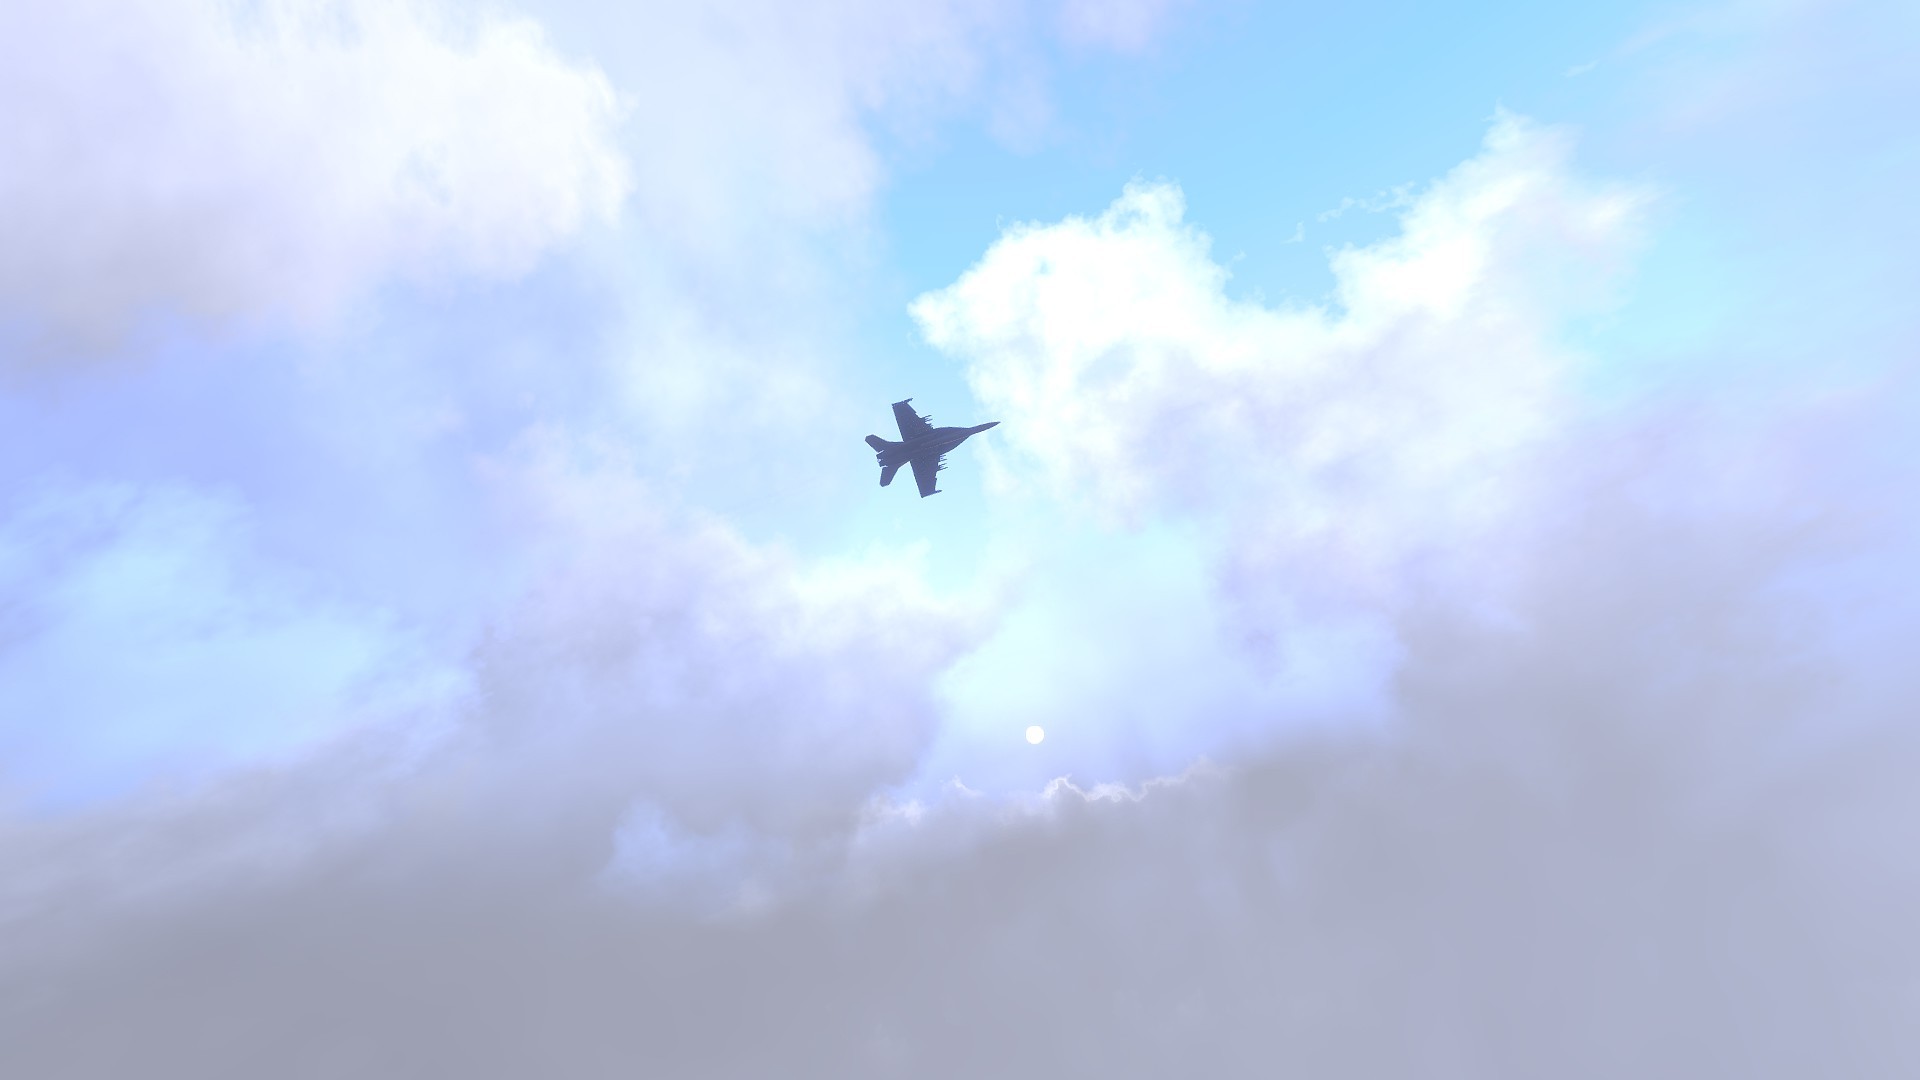 General 1920x1080 McDonnell Douglas F/A-18 Hornet Arma 3 jet fighter sky clouds PC gaming military aircraft screen shot